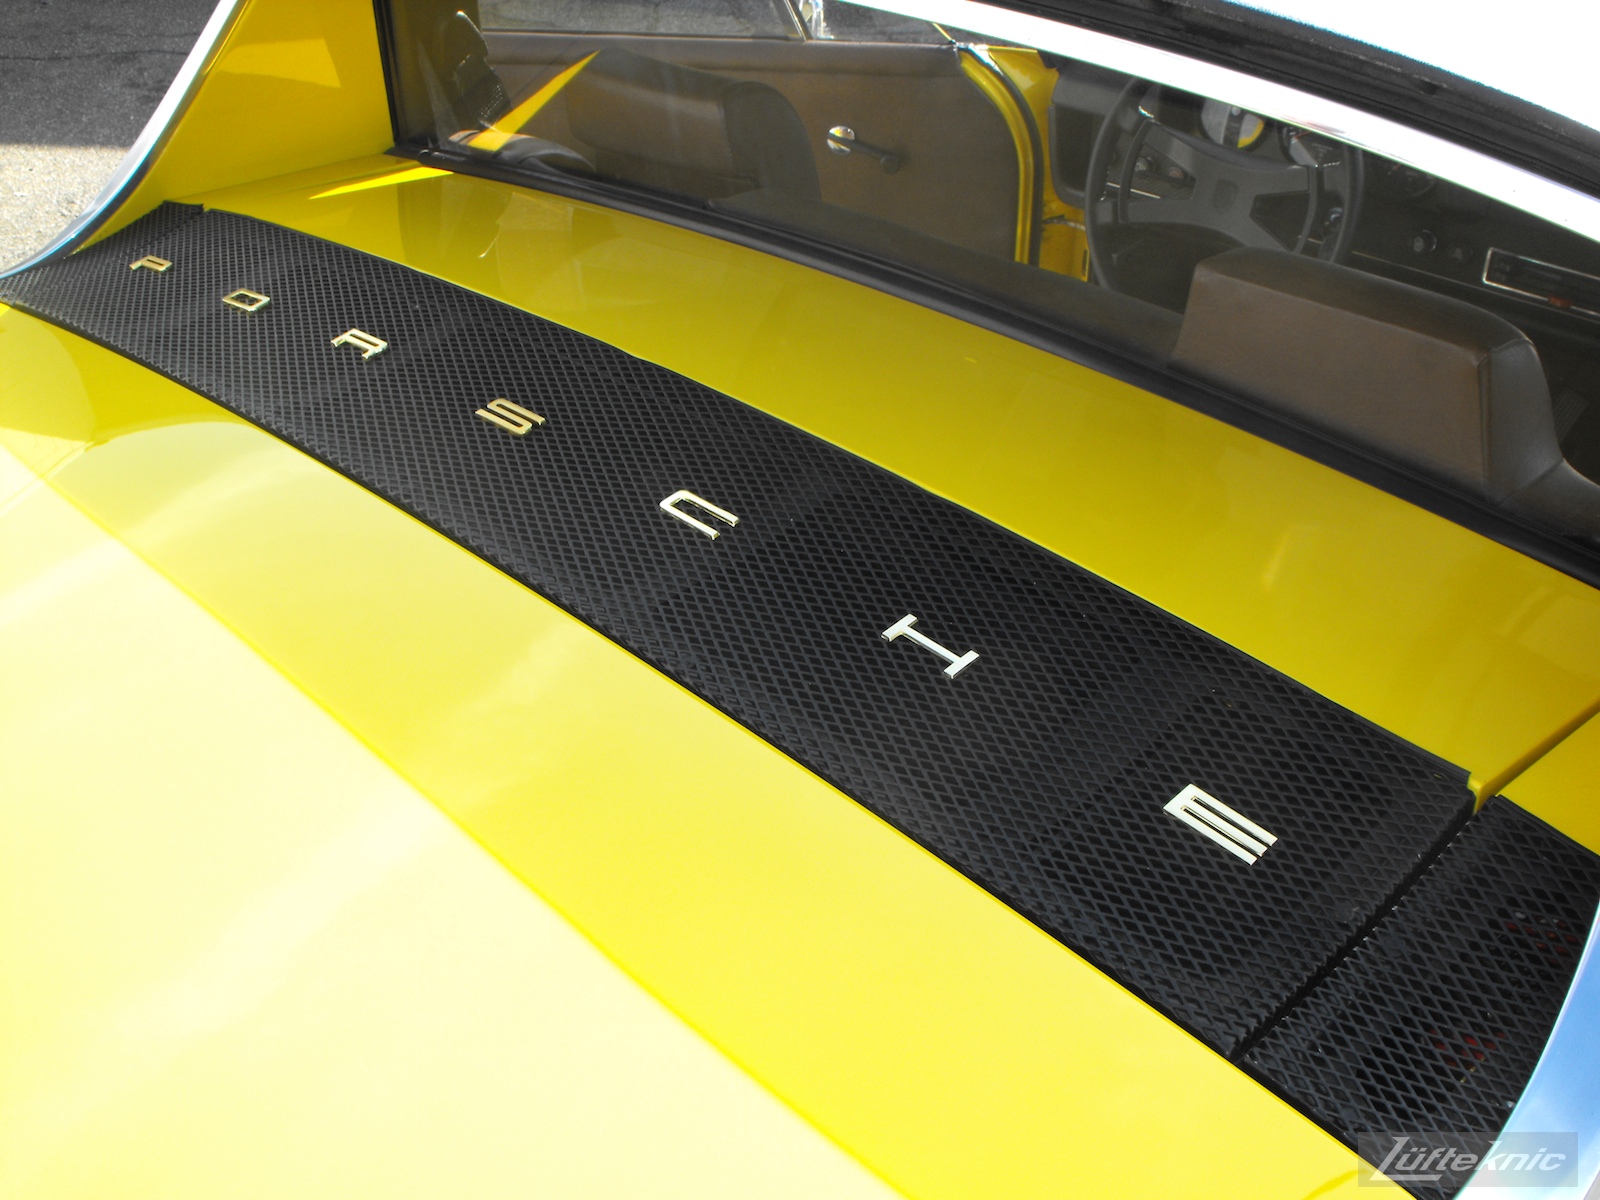 Engine deck lid details on a completely restored yellow Porsche 914 posing in the parking lot of Lufteknic.